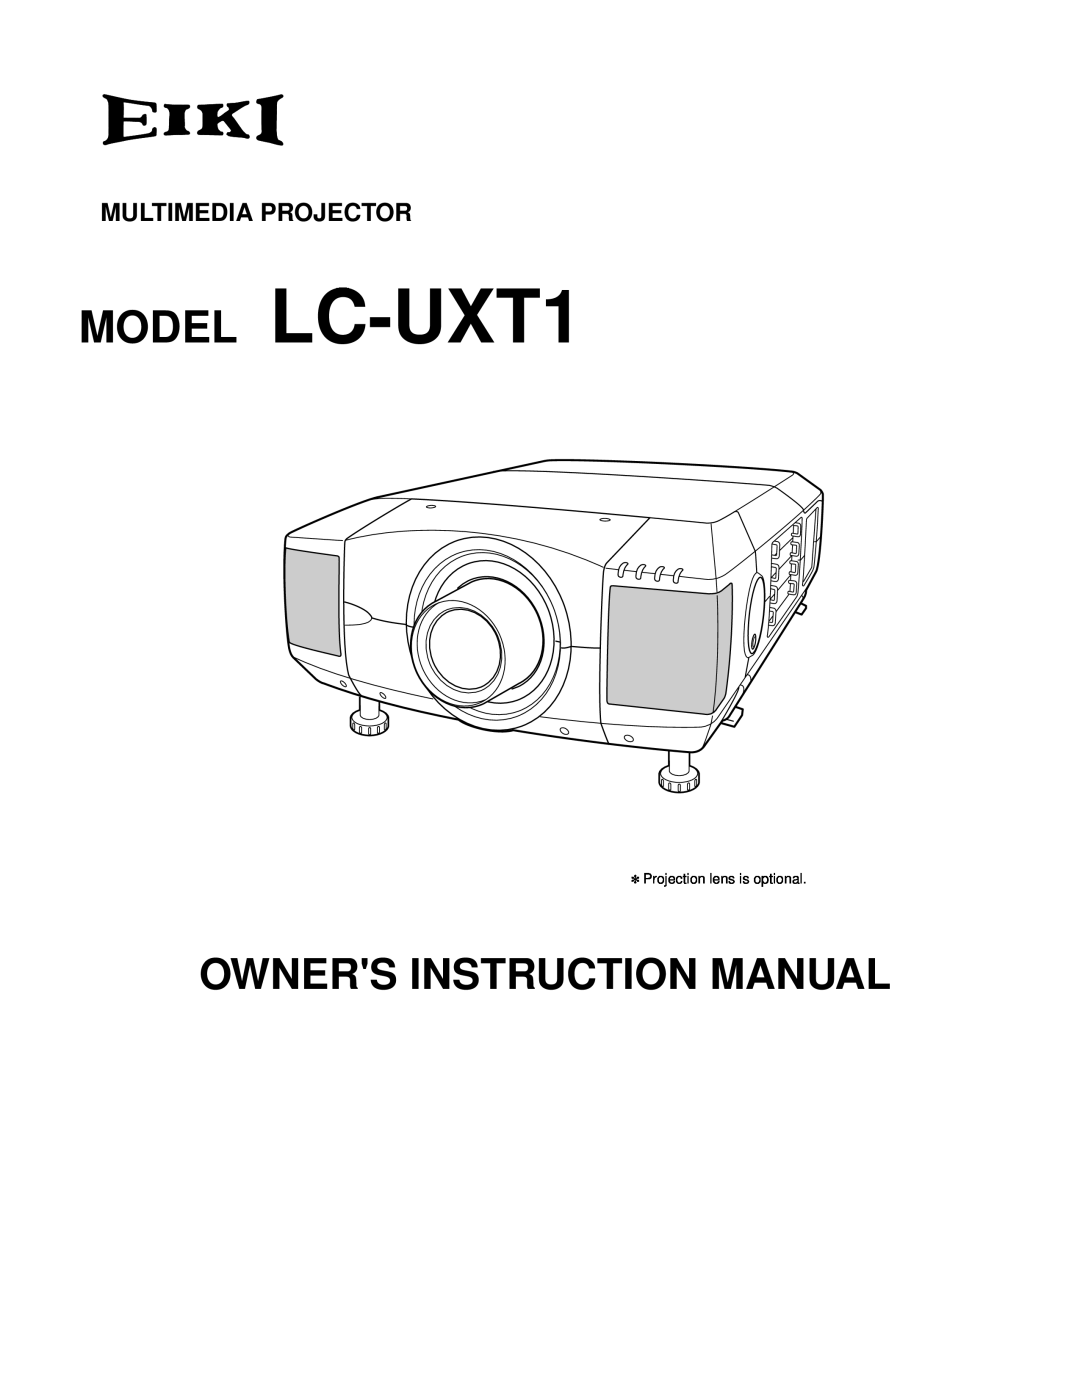 Eiki instruction manual Multimedia Projector, MODEL LC-UXT1, Owners Instruction Manual, Projection lens is optional 